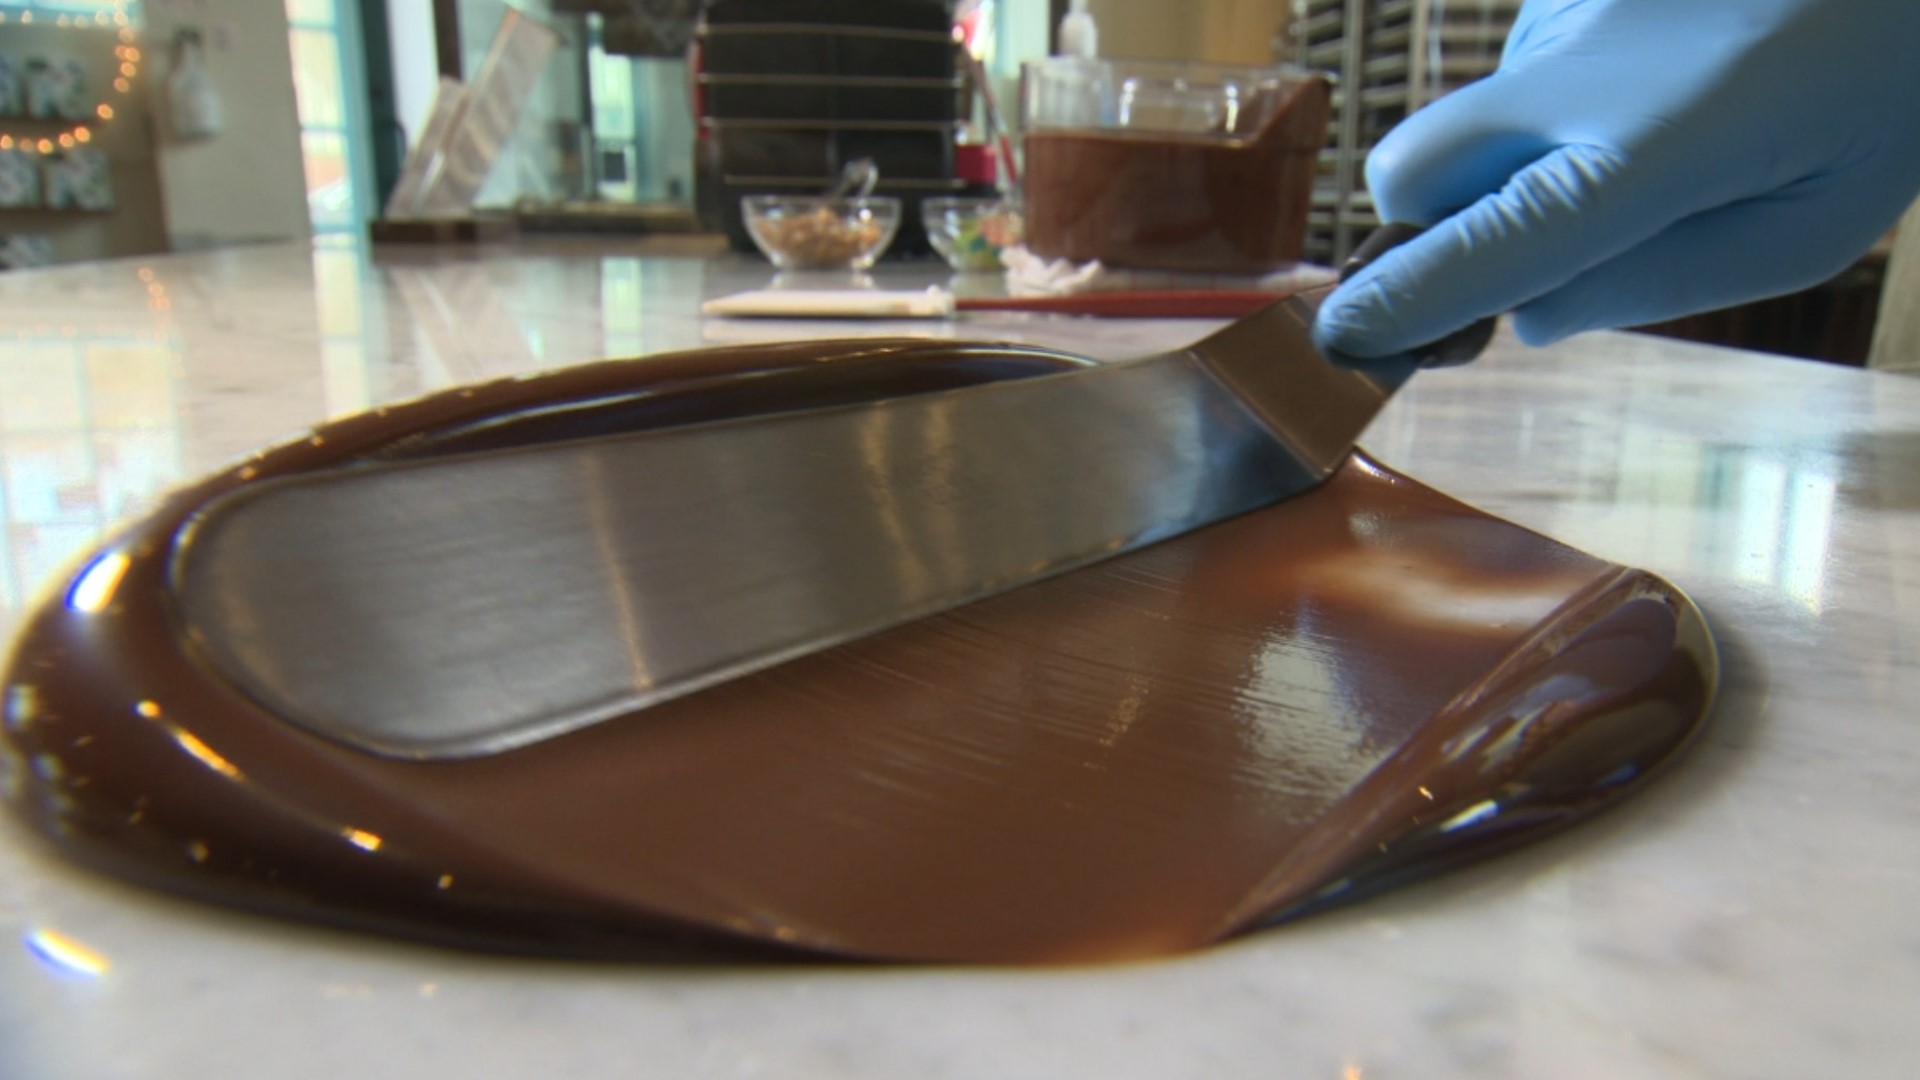 Theo Chocolate has been giving customers a front-row seat to their production process for nearly 20 years.  #k5evening